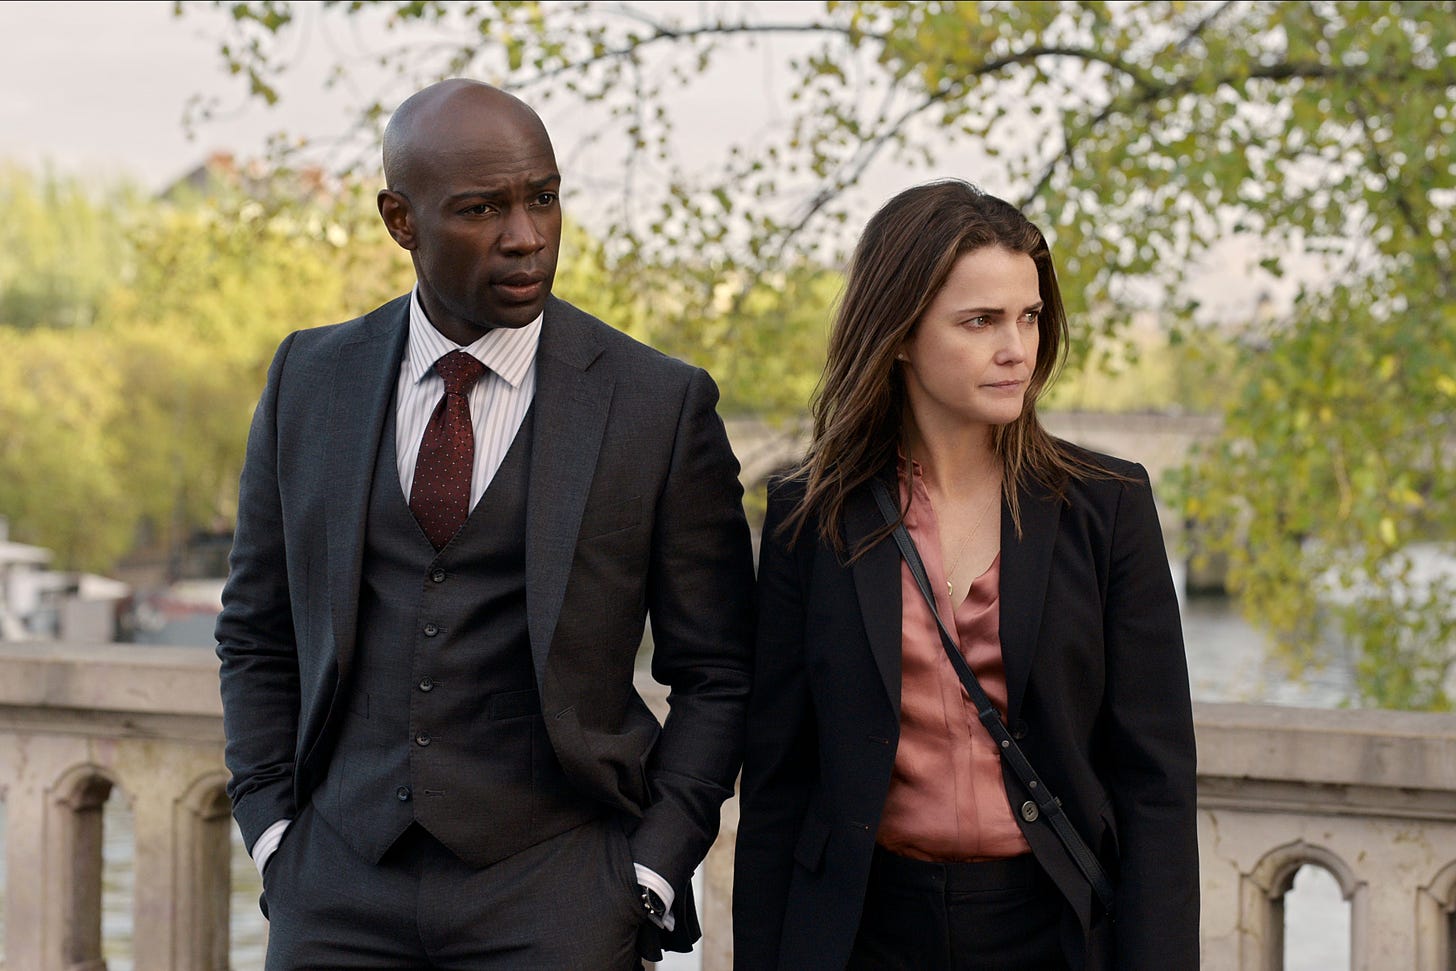 Still from the tv show The Diplomat. Two people stand on a bridge in Paris over the Seine. The man on the left is in a sharp suite and well chosen burgundy tie. Glowing black skin and shaved head. Woman on the right is in an off the rack black suit, unbrushed hair, and thinking deeply. Clearly these two are destined for some fun together.